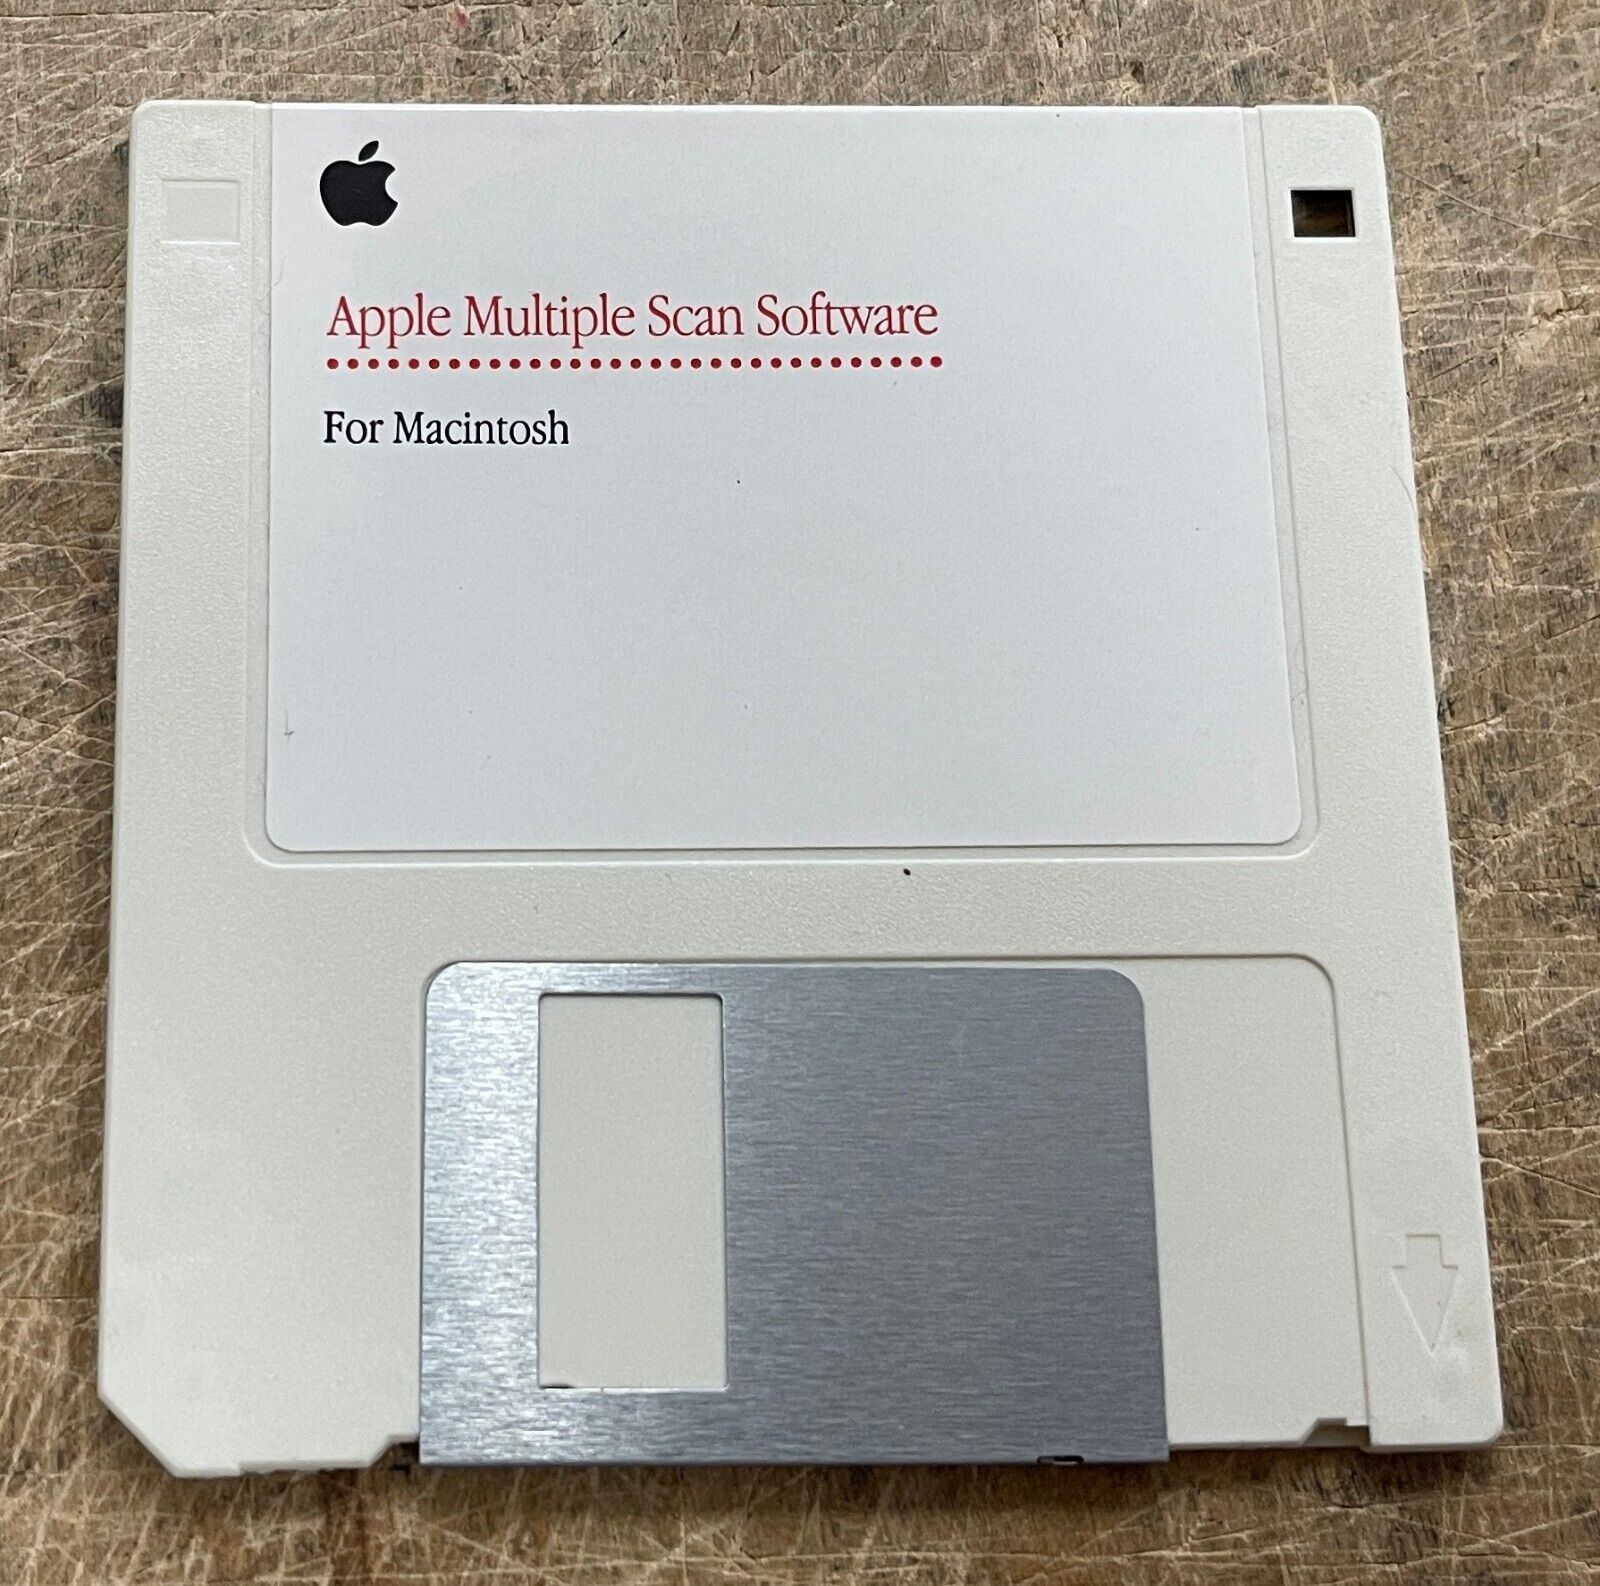 Apple Multiple Scan Software For Macintosh Floppy P/N: 690-1694-A